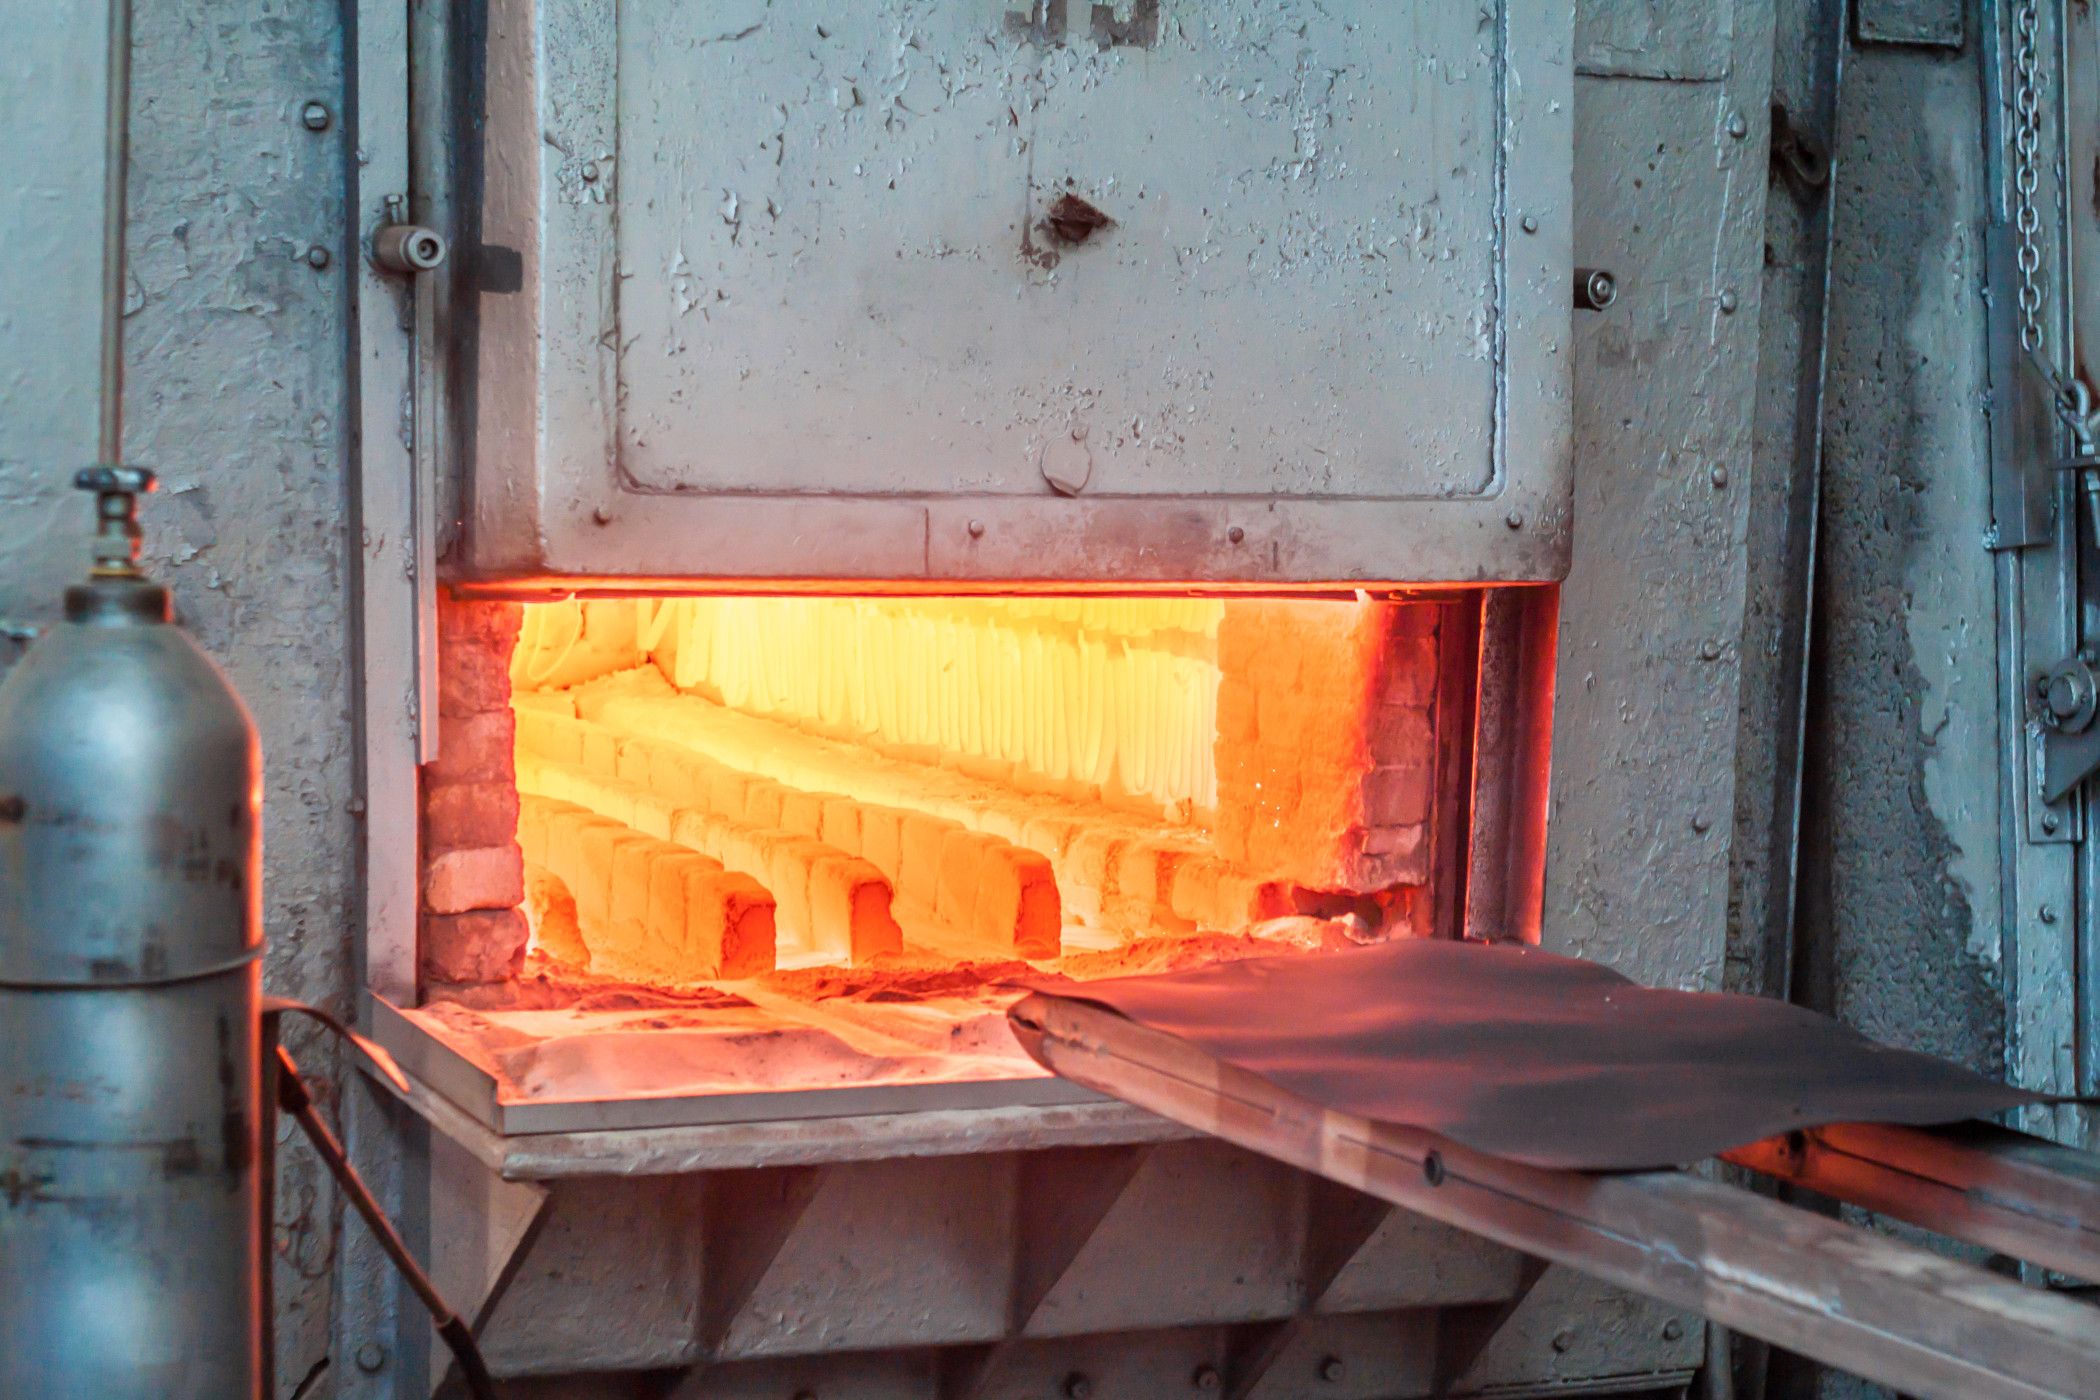 Making industrial furnaces more energy-efficient